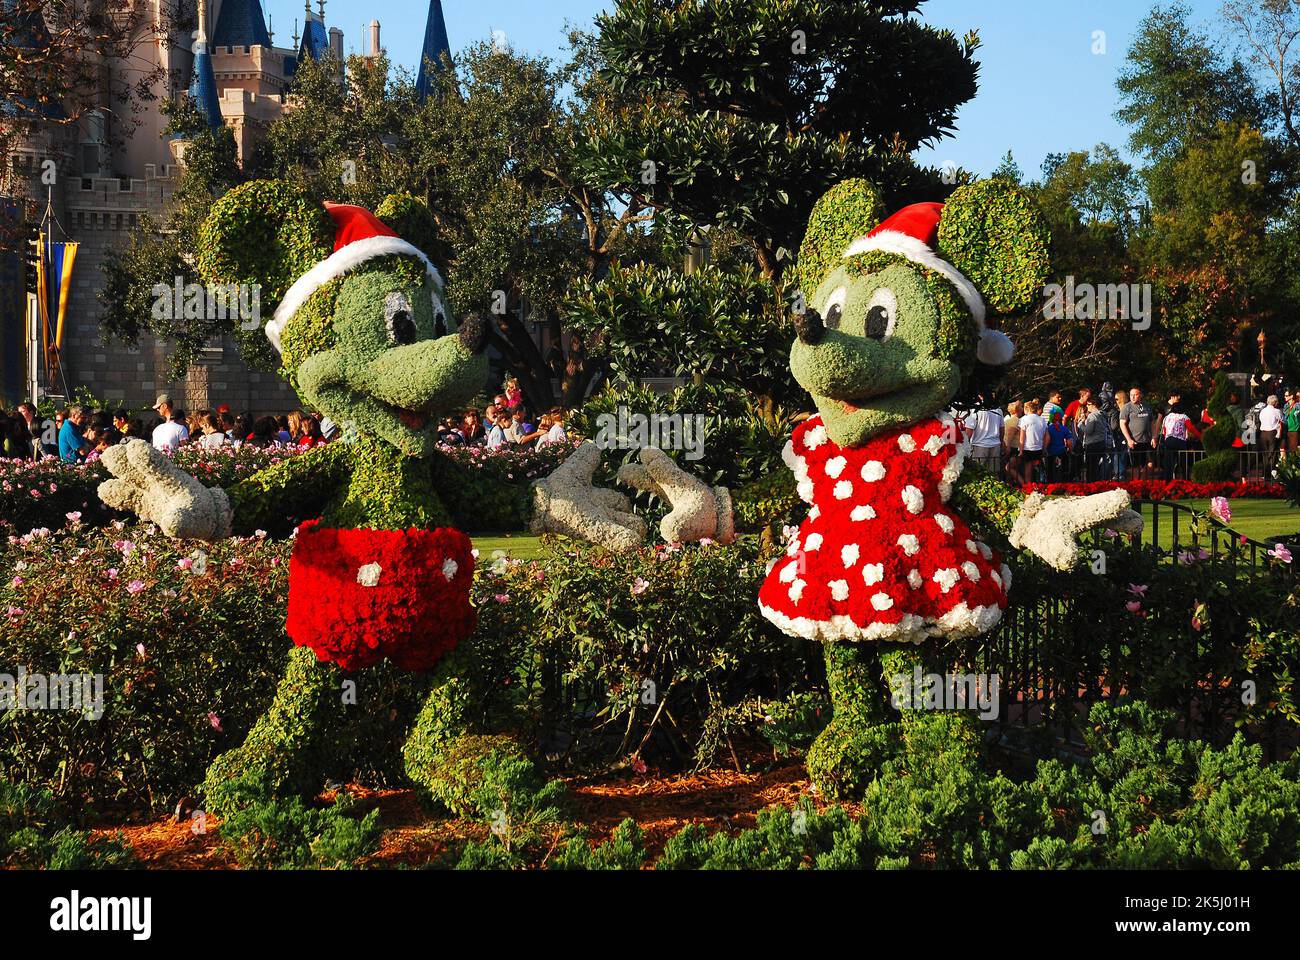 Bushes and shrubs are cut and designed as Mickey Mouse and Minnie Mouse, dressed in the Christmas Holiday celebration at Walt Disney World Stock Photo